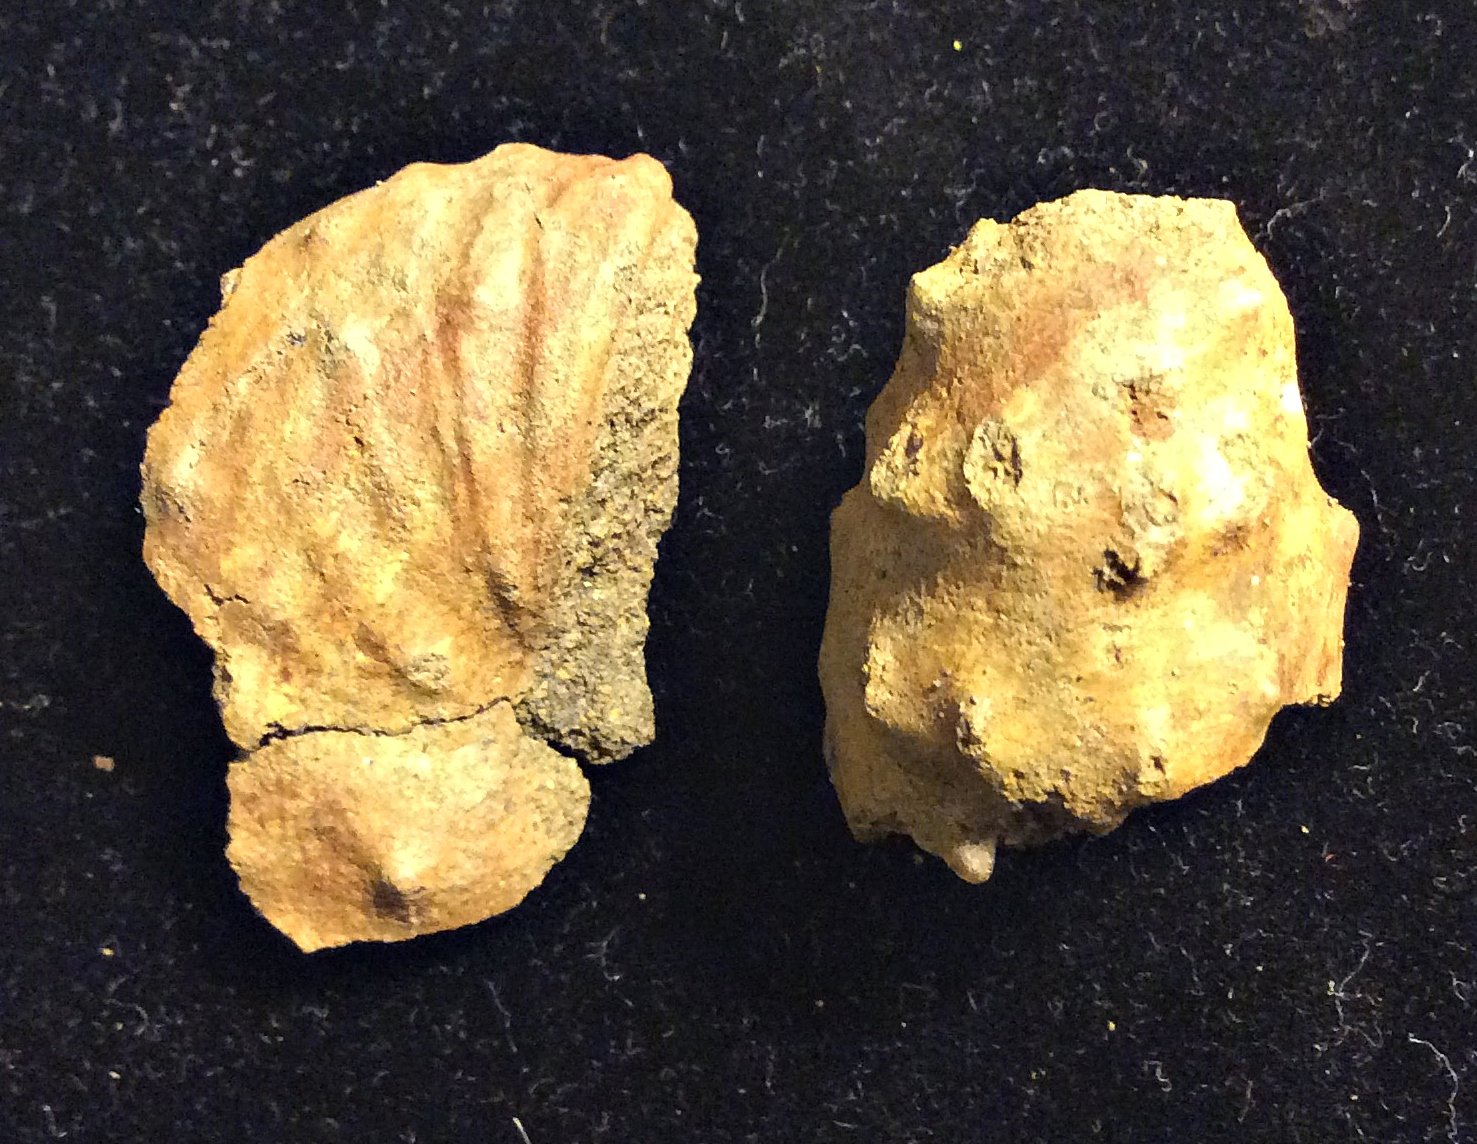 Discoscaphites pieces from the Pinna Layer